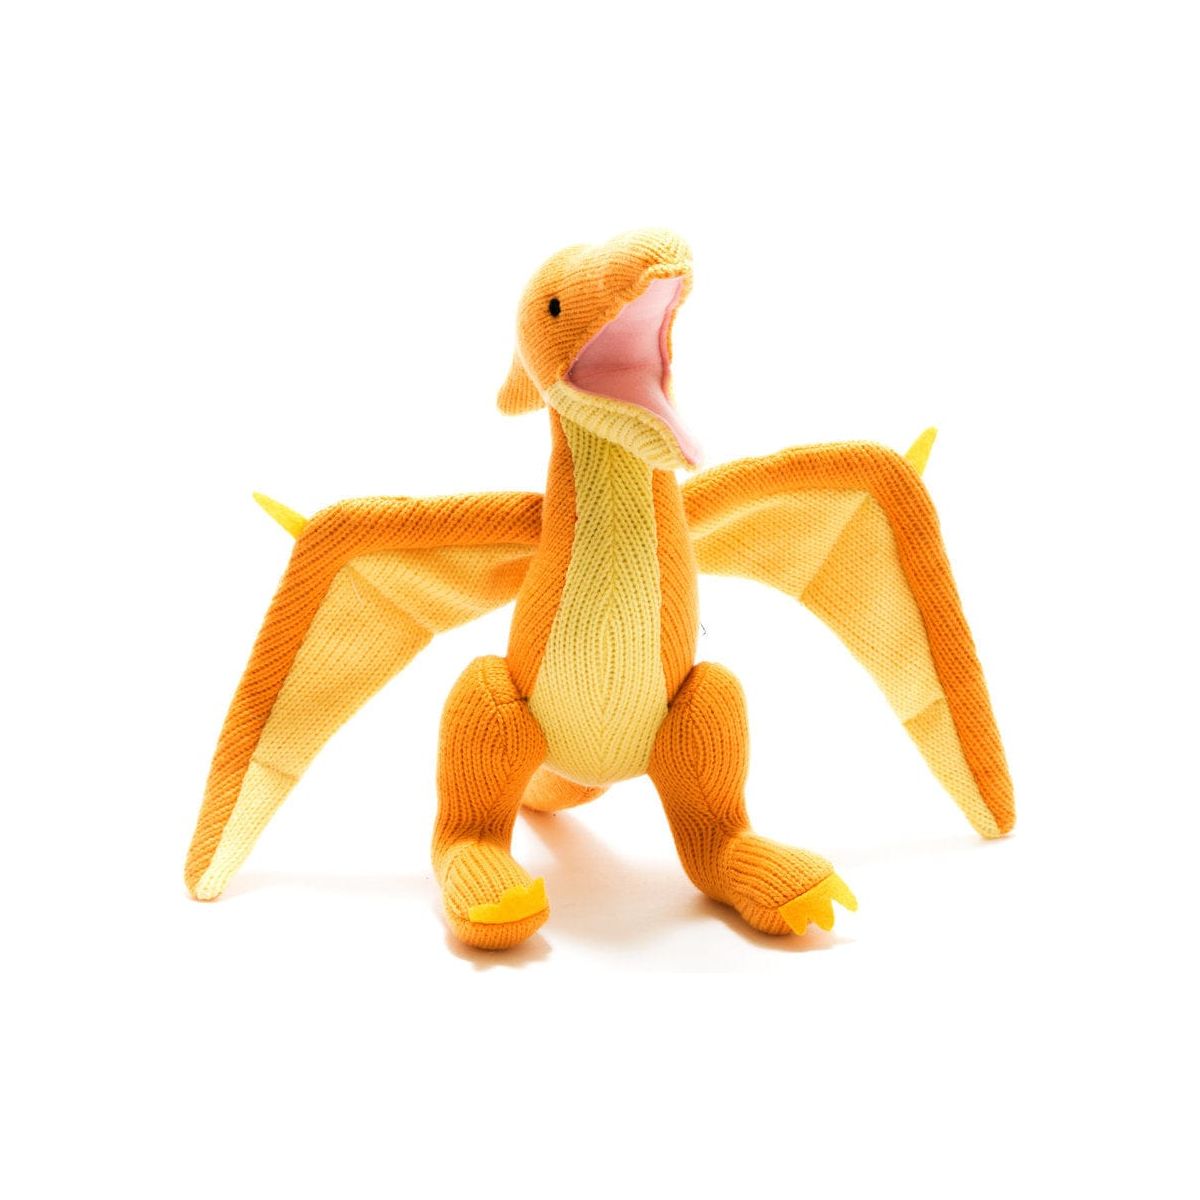 Best Years Ltd Knitted Yellow Pterodactyl Dinosaur Large Toy